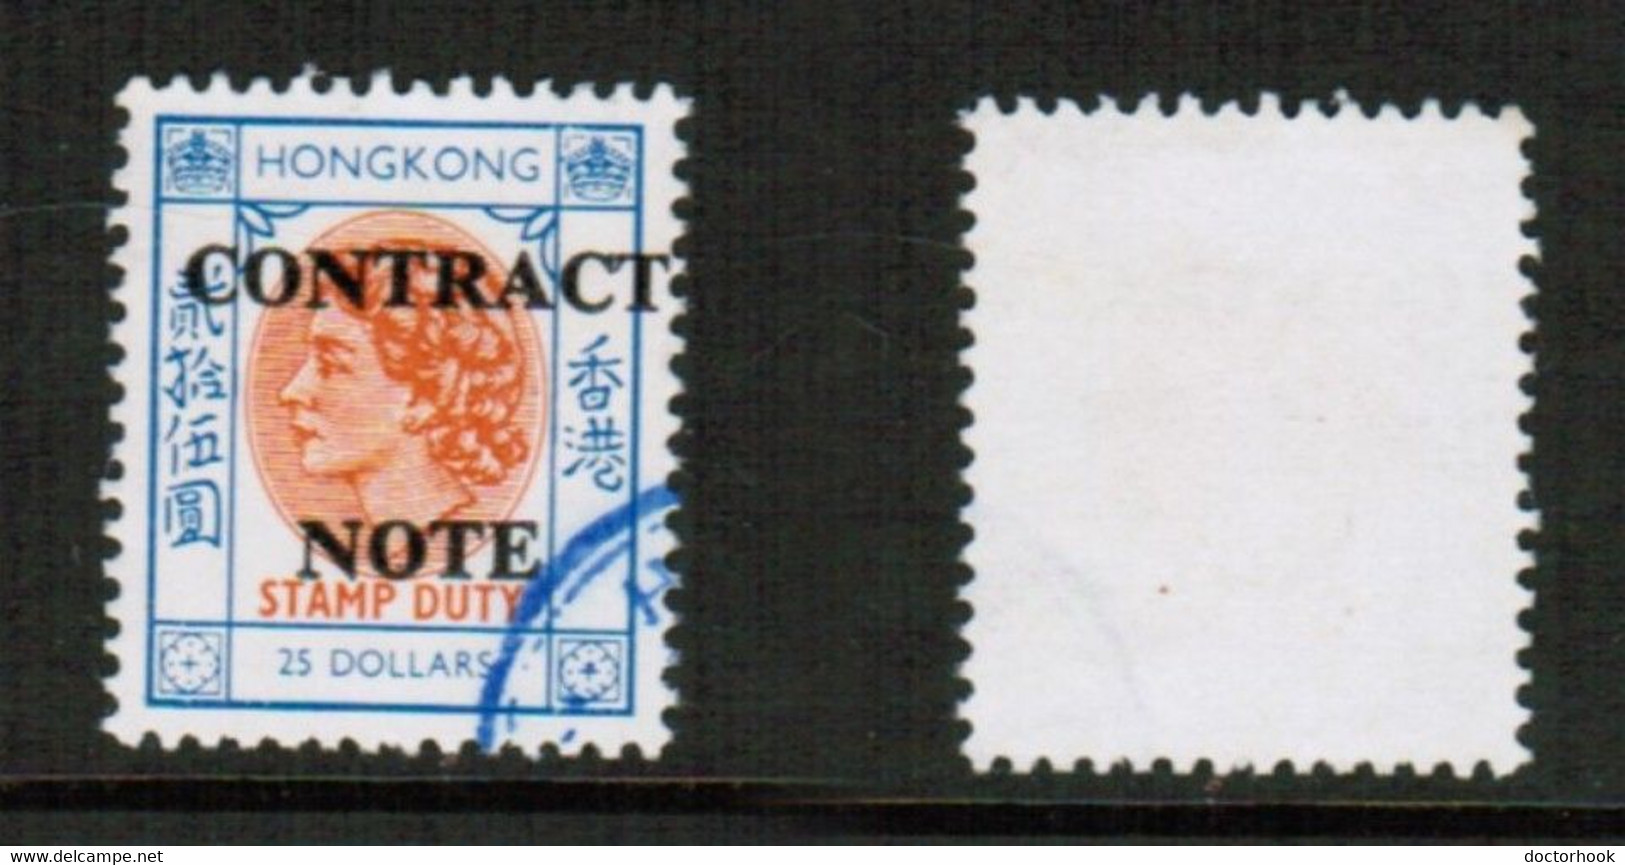 HONG KONG   $25.00 DOLLAR CONTRACT NOTE FISCAL USED (CONDITION AS PER SCAN) (Stamp Scan # 829-2) - Postal Fiscal Stamps